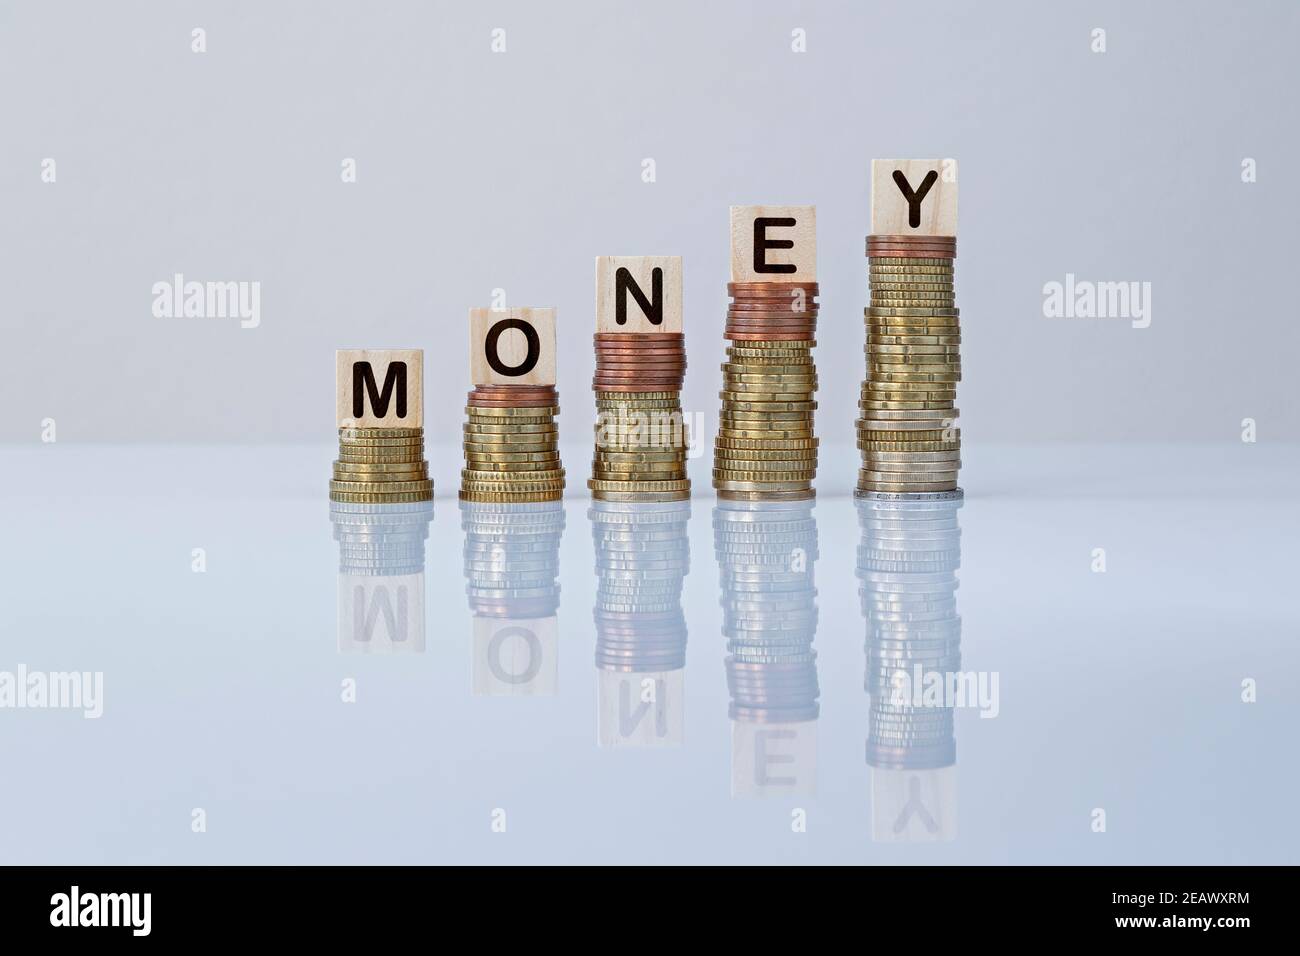 Word MONEY on wooden blocks on top of ascending stacks of coins on gray background. Concept photo of making money, earning, economy, financial growth. Stock Photo